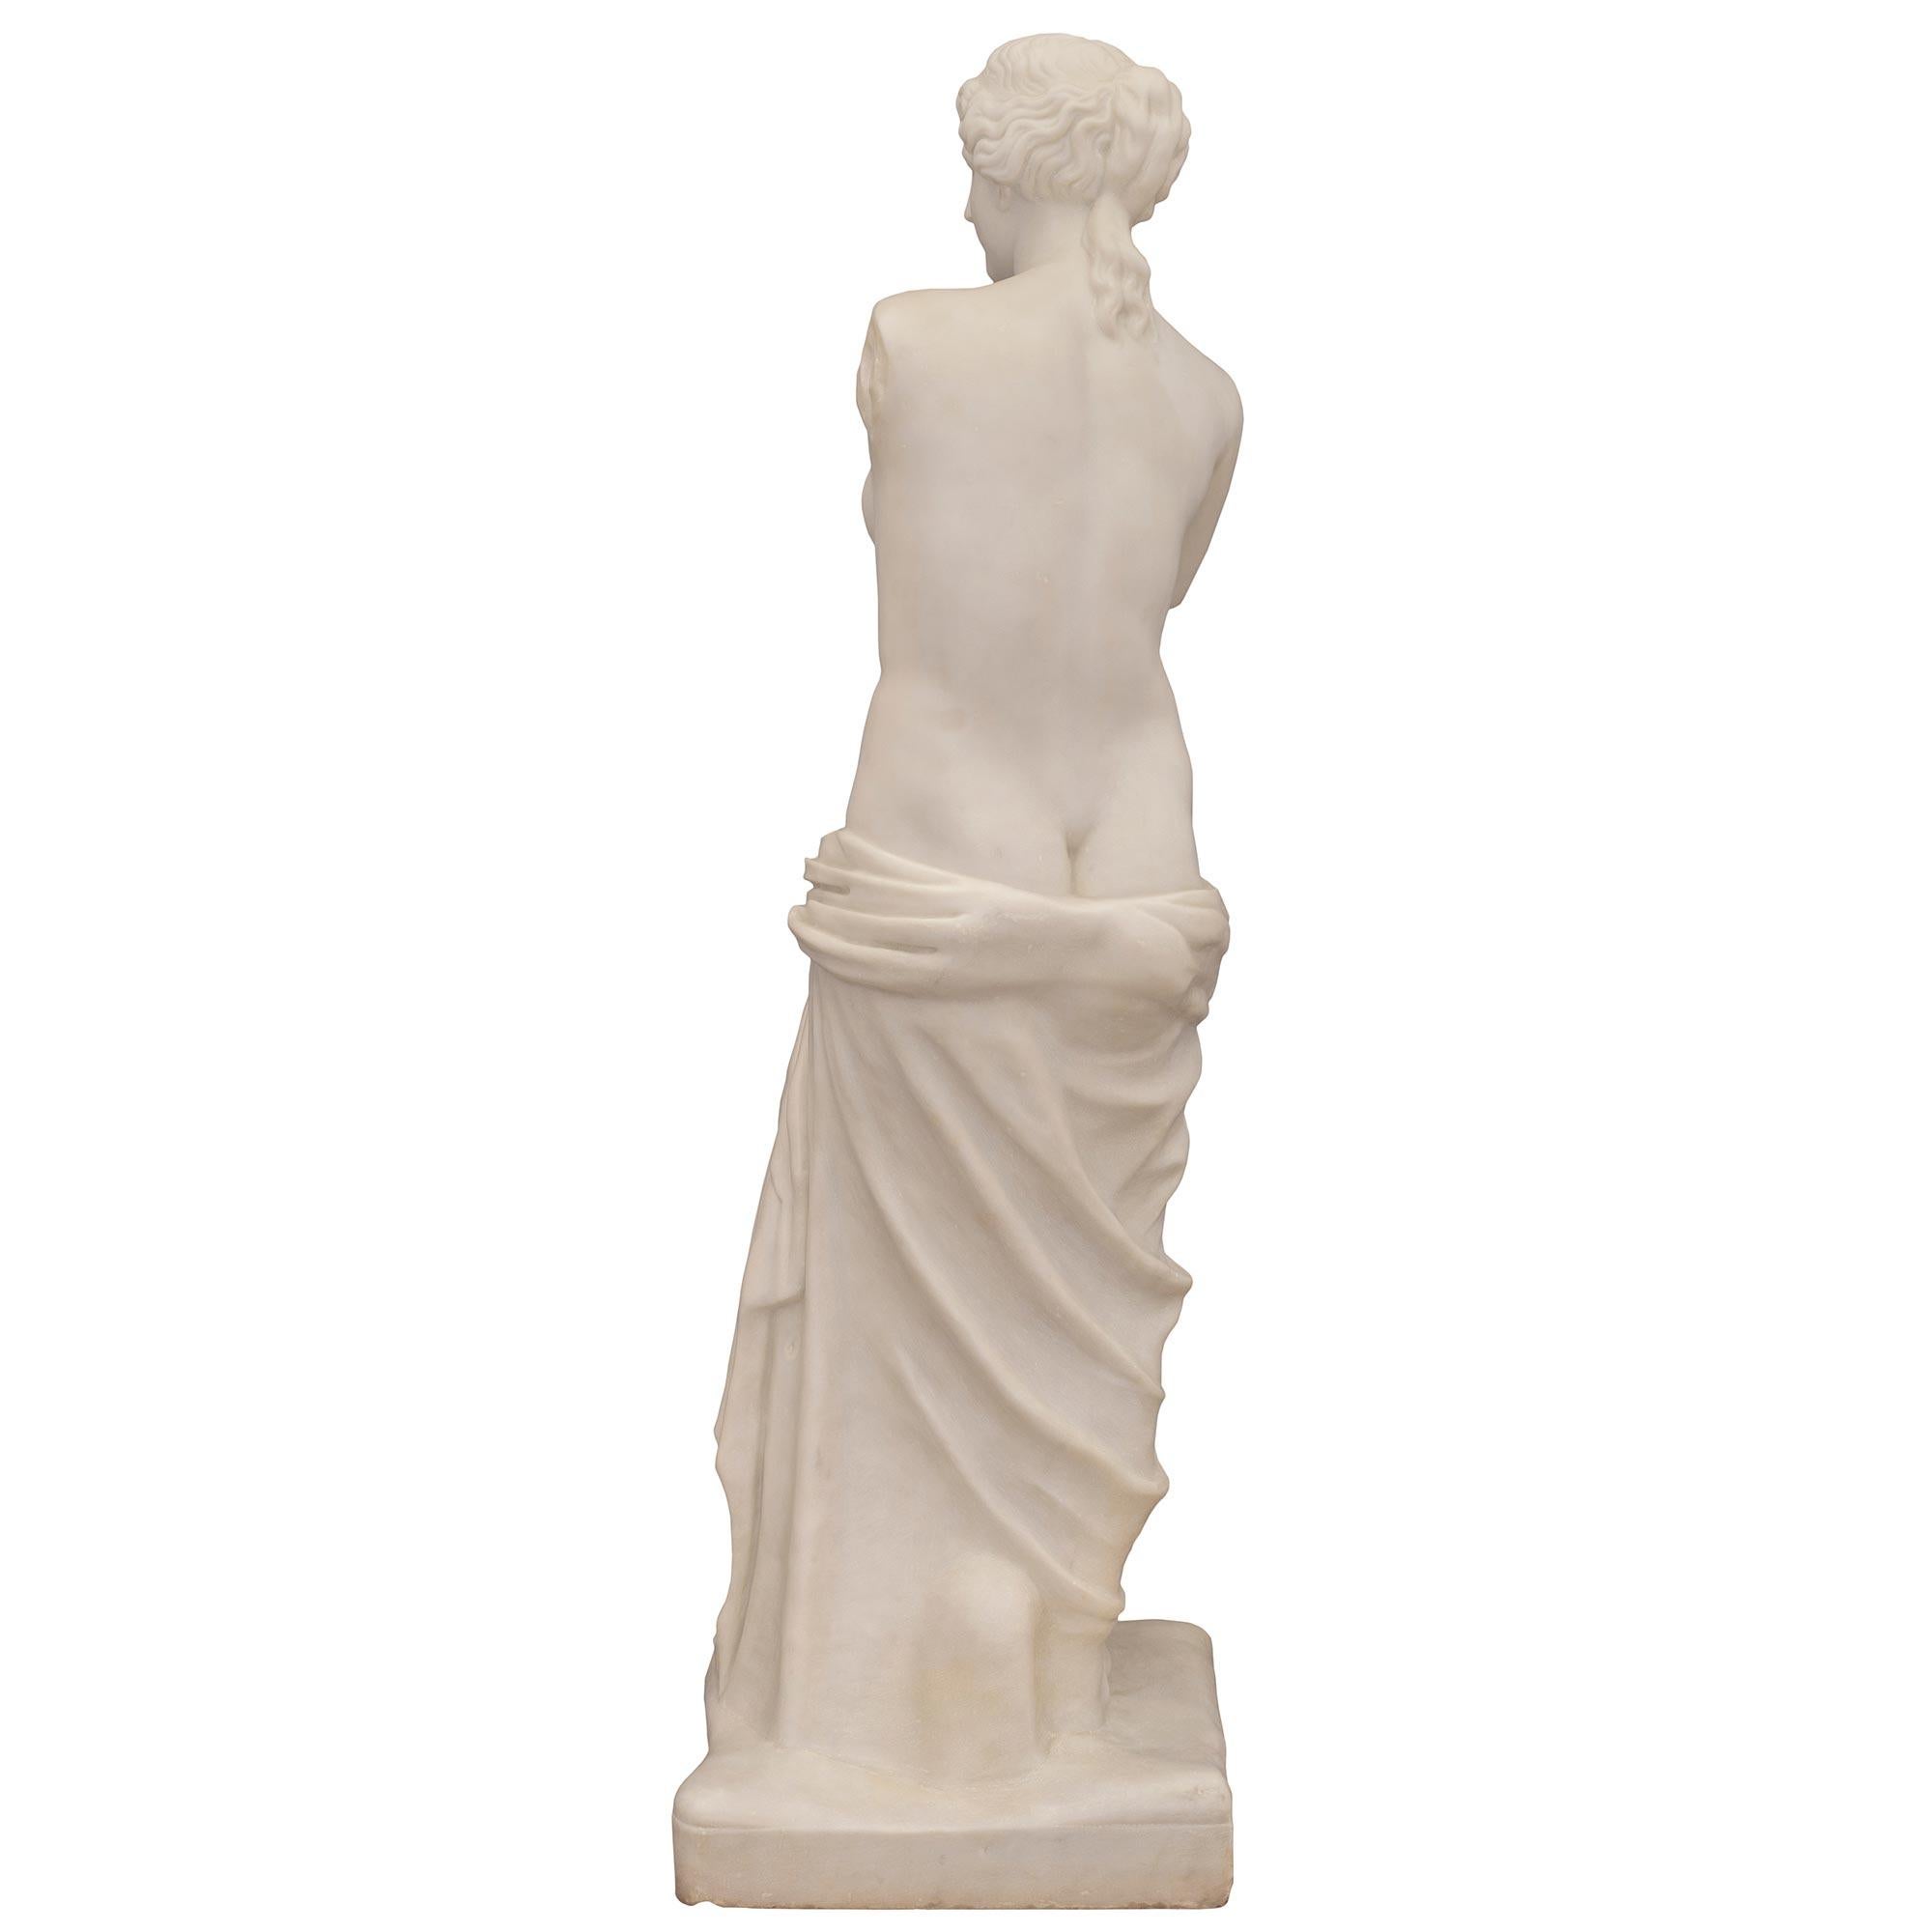 A beautiful and very high quality Italian 19th century Neo-Classical st. white Carrara marble statue of Venus de Milo, signed G. Pettini & Figli Pisa. The statue is raised by a wonderfully executed ground designed base where the signature is